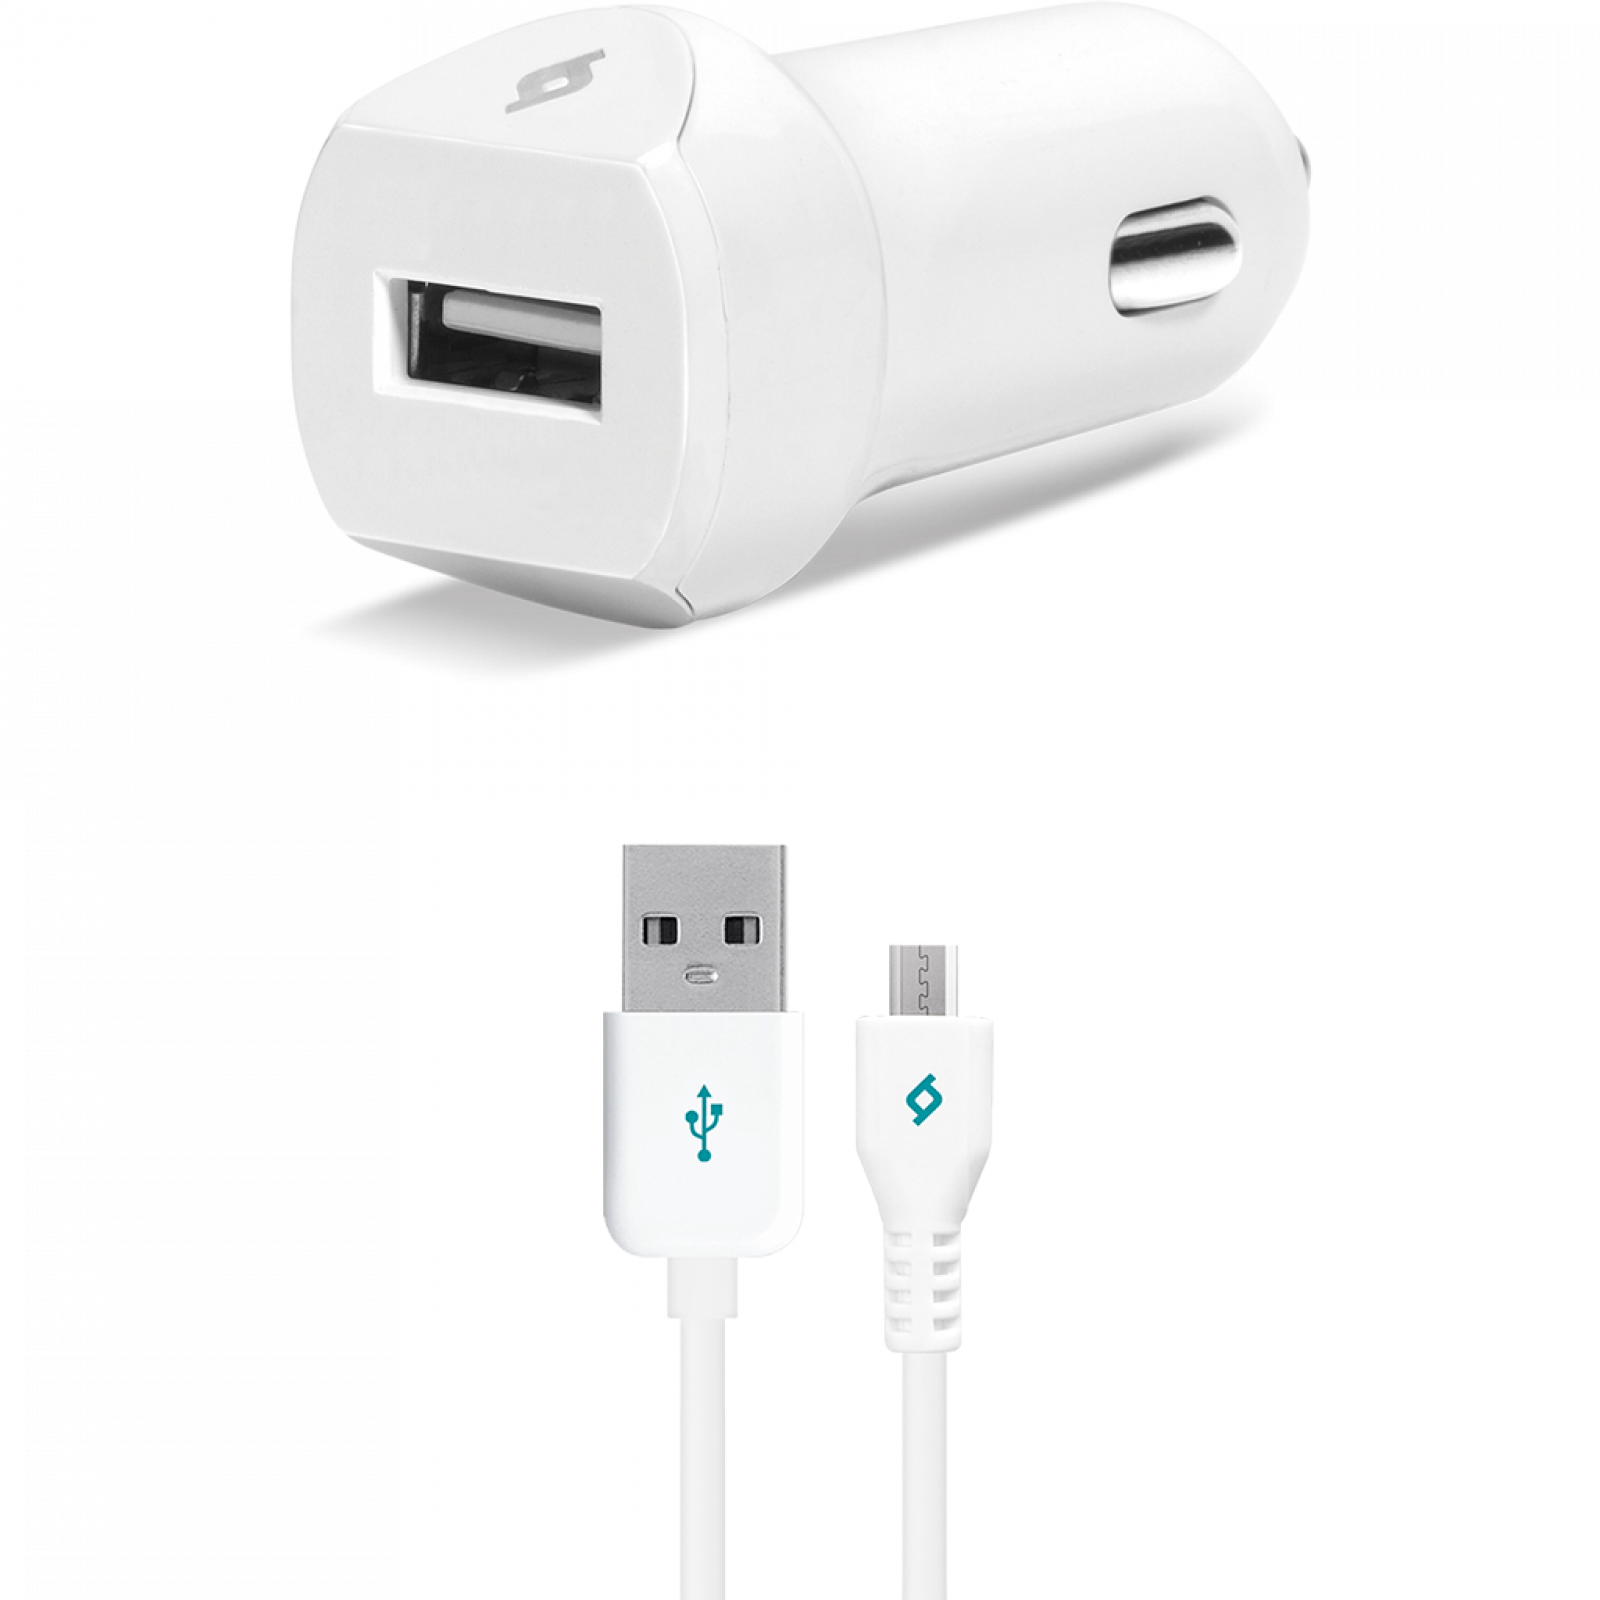 Зарядно за кола 12V SpeedCharger USB In-Car Charger, 2,1A, incl, Micro USB Cable - Бяло